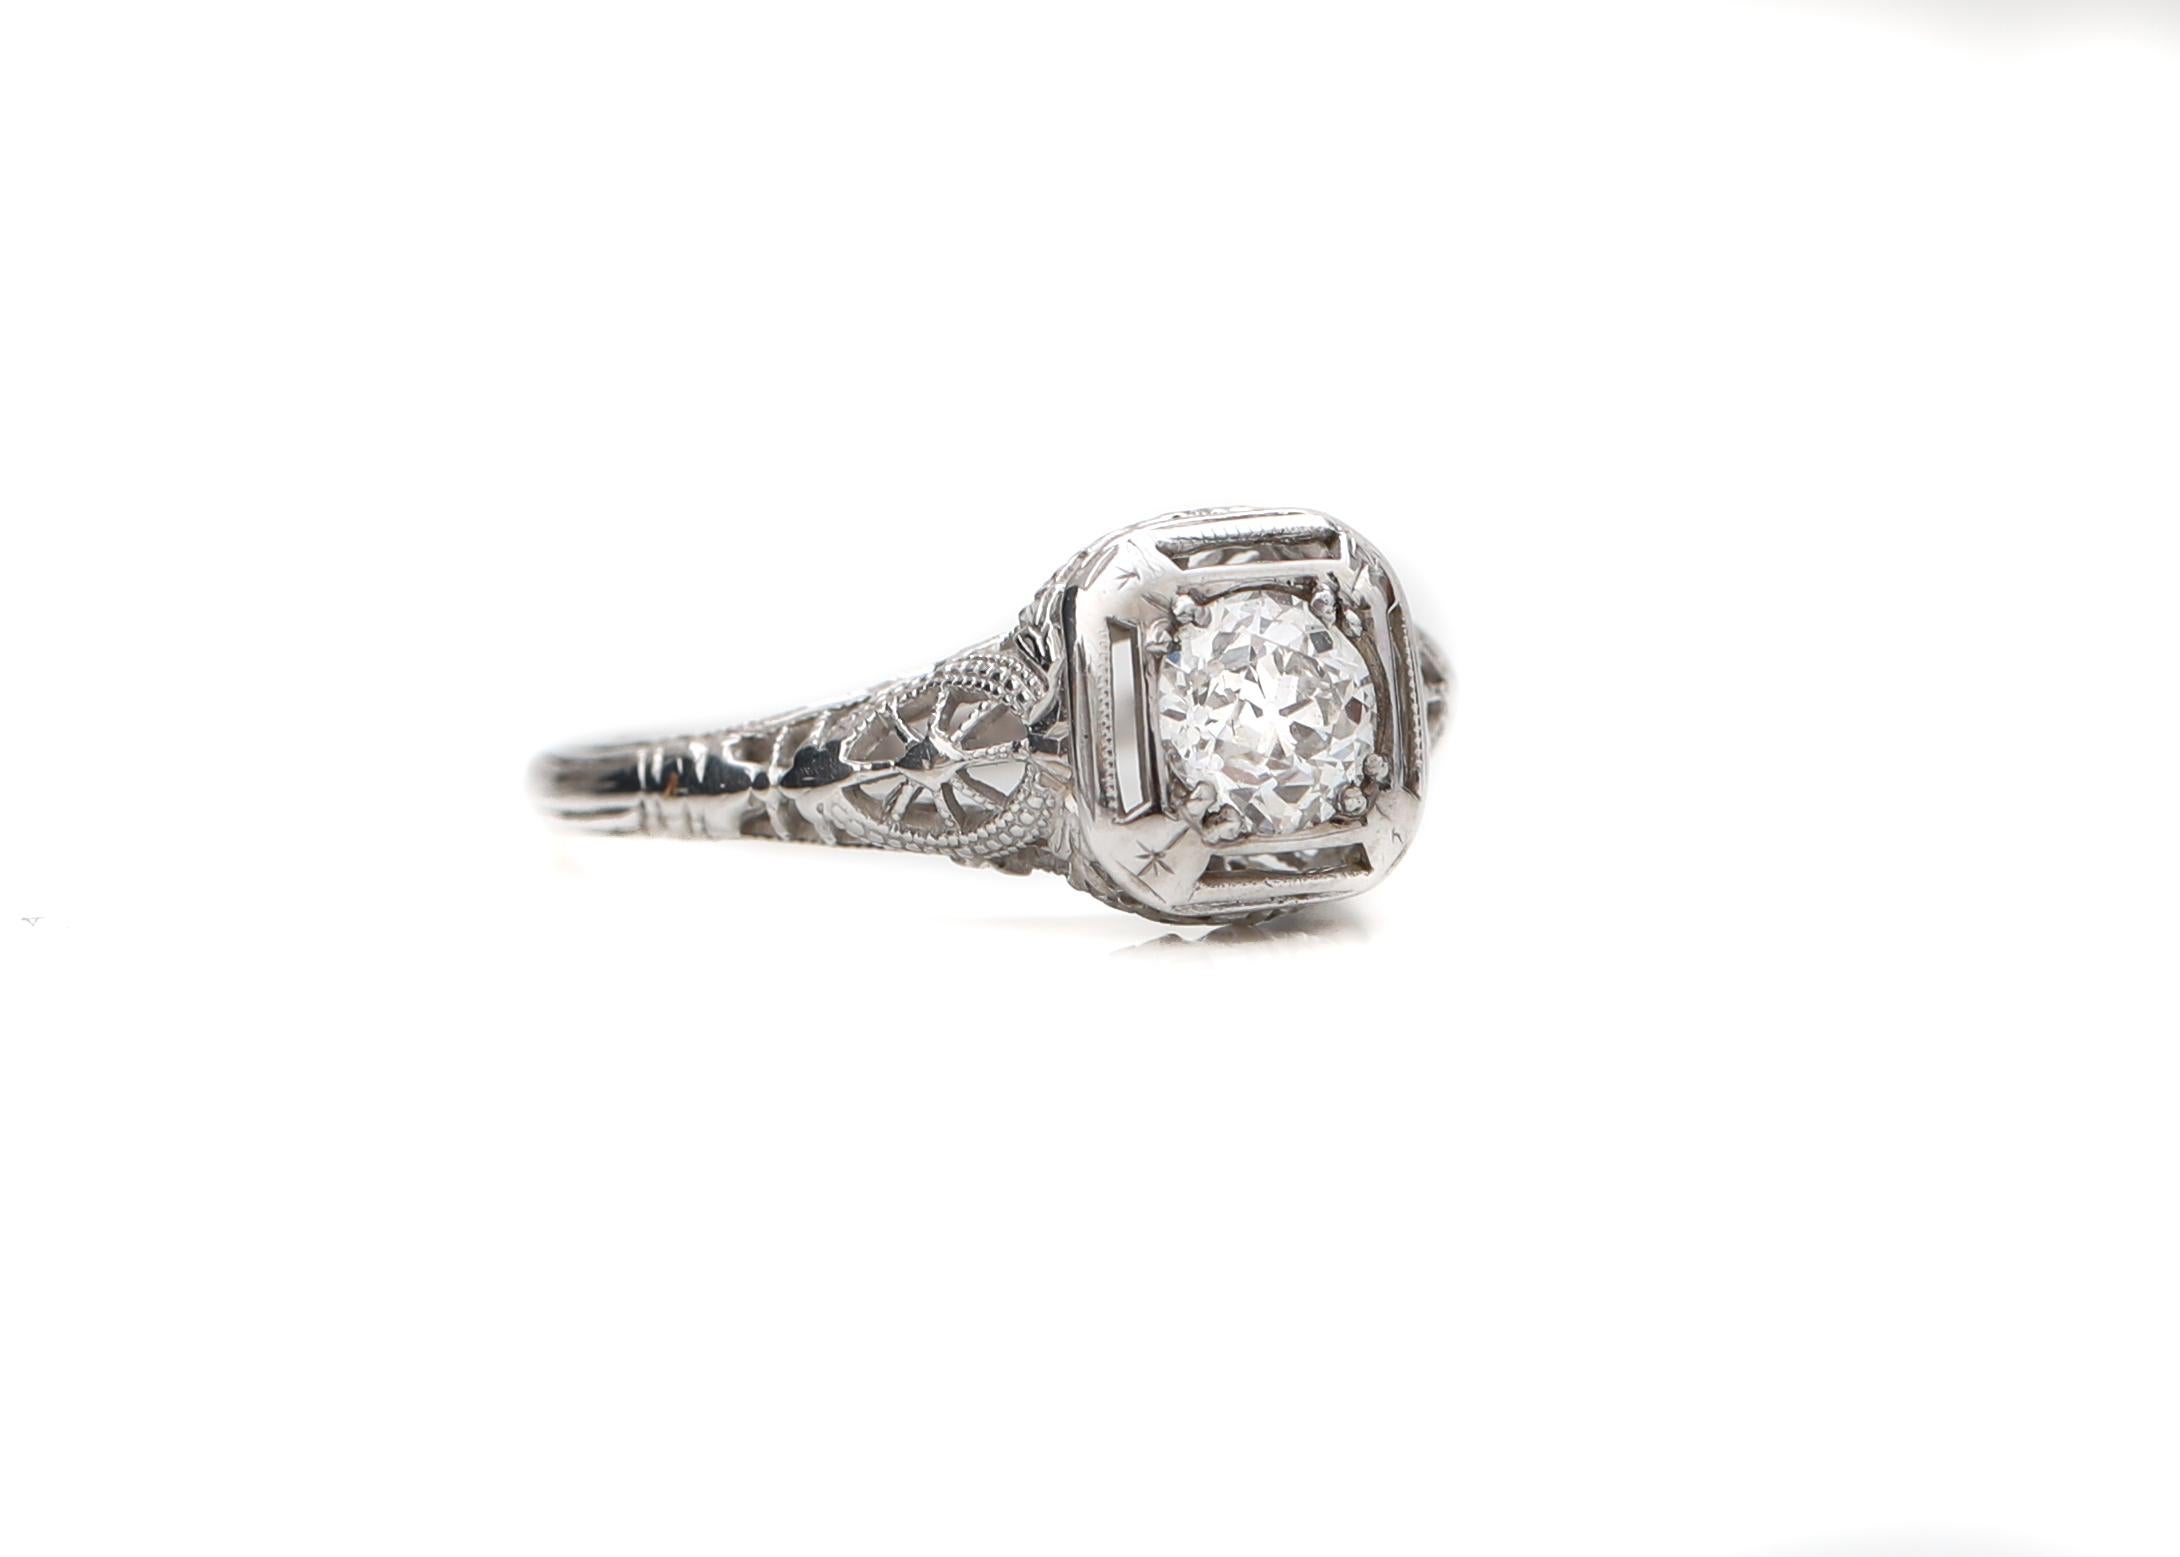 Here we have a beautiful 1920's Art Deco Engagement Ring featuring a .65ct old miner cut diamond as the center piece. Surrounding the diamond there is intricate design which is typical of that era. Lots of filigree pattern can be seen with a